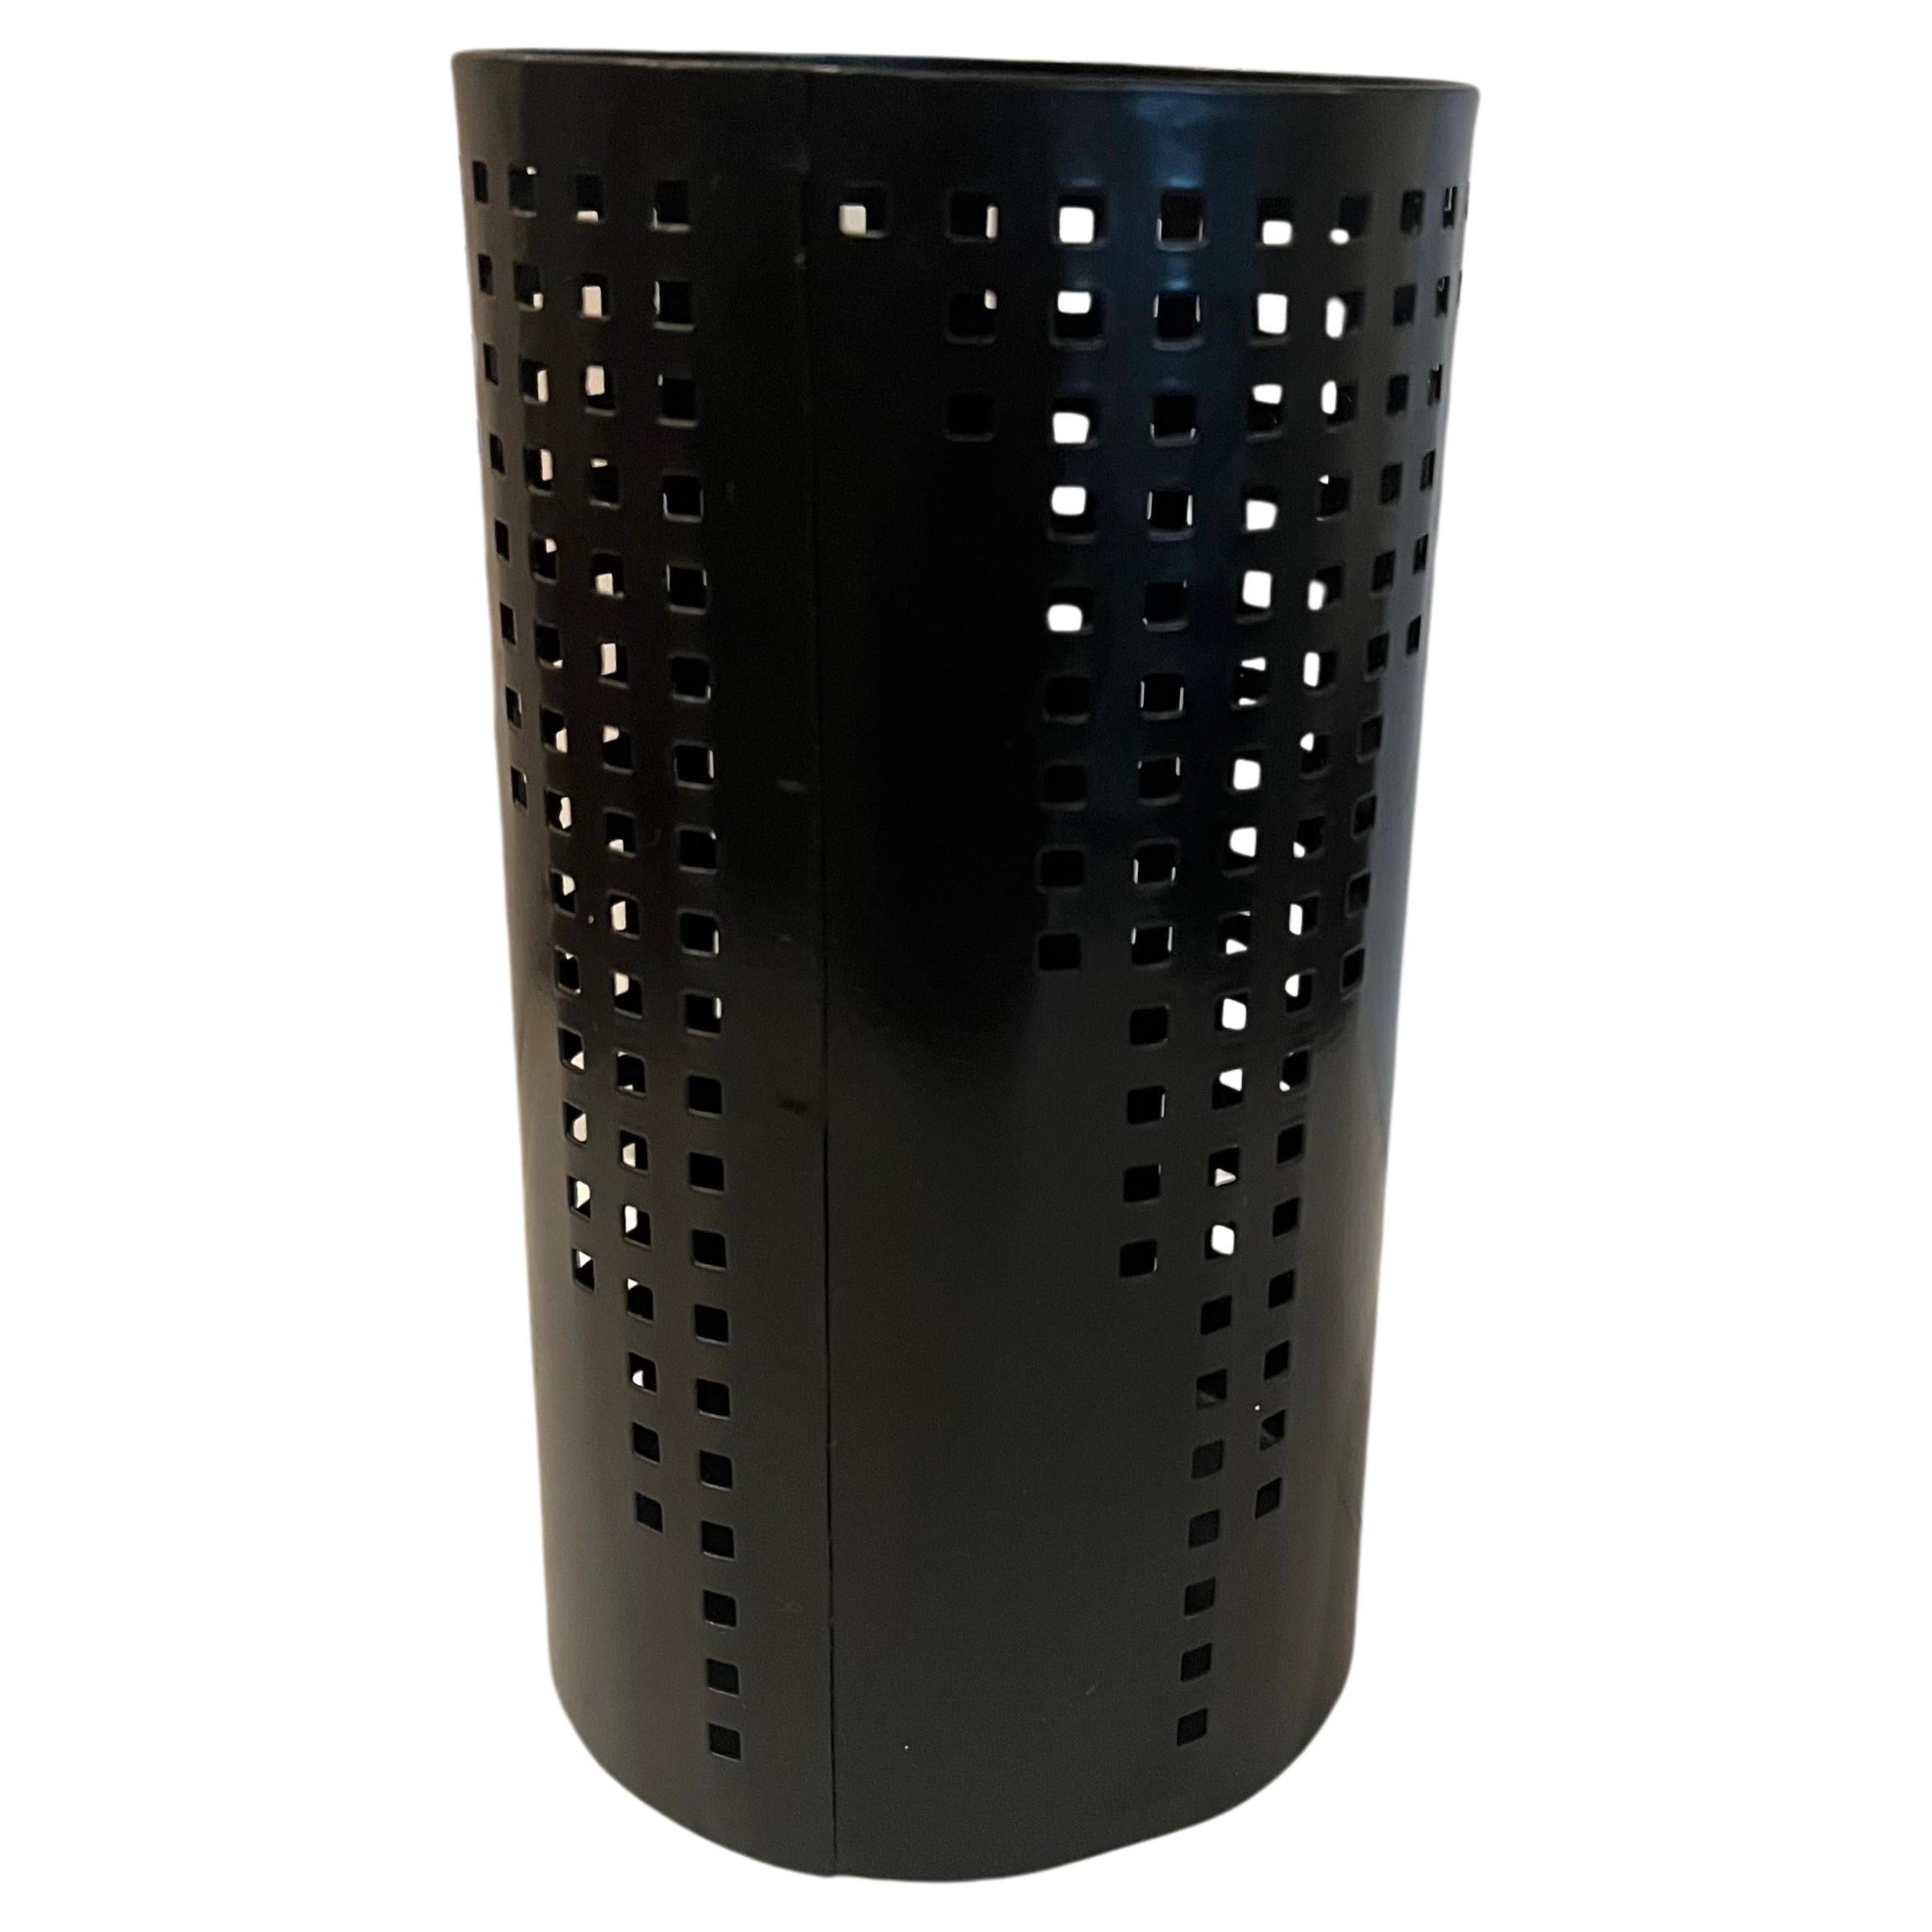 Black enameled perforated metal utensil pen holder circa 1980's small ding on the bottom as shown.